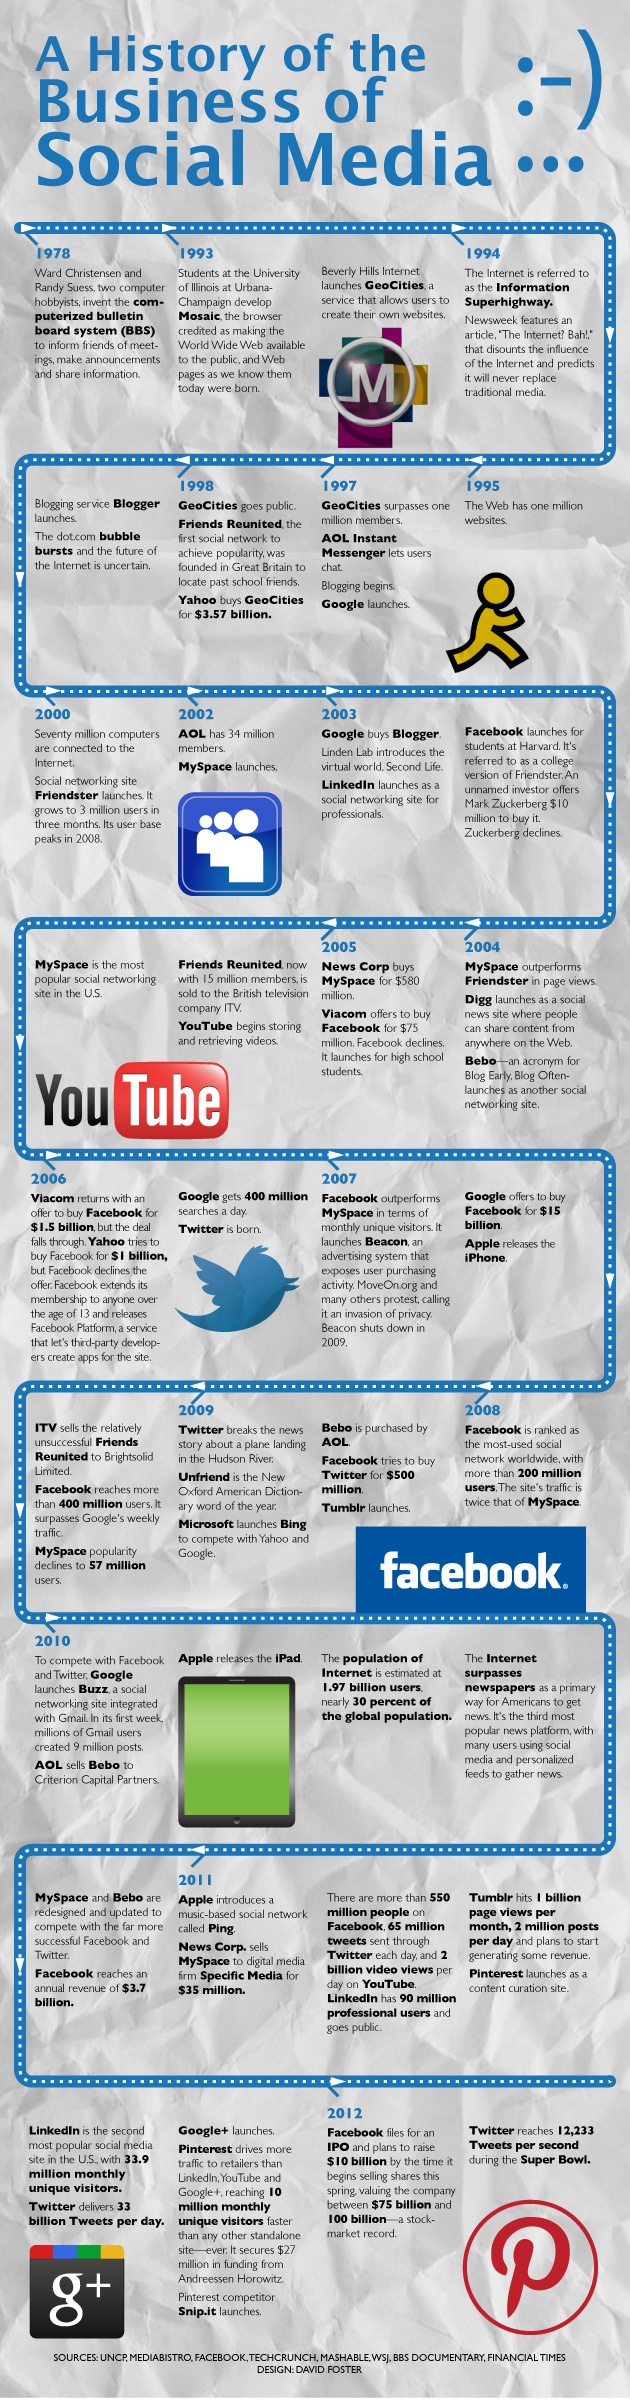 A History of the Business of Social Media